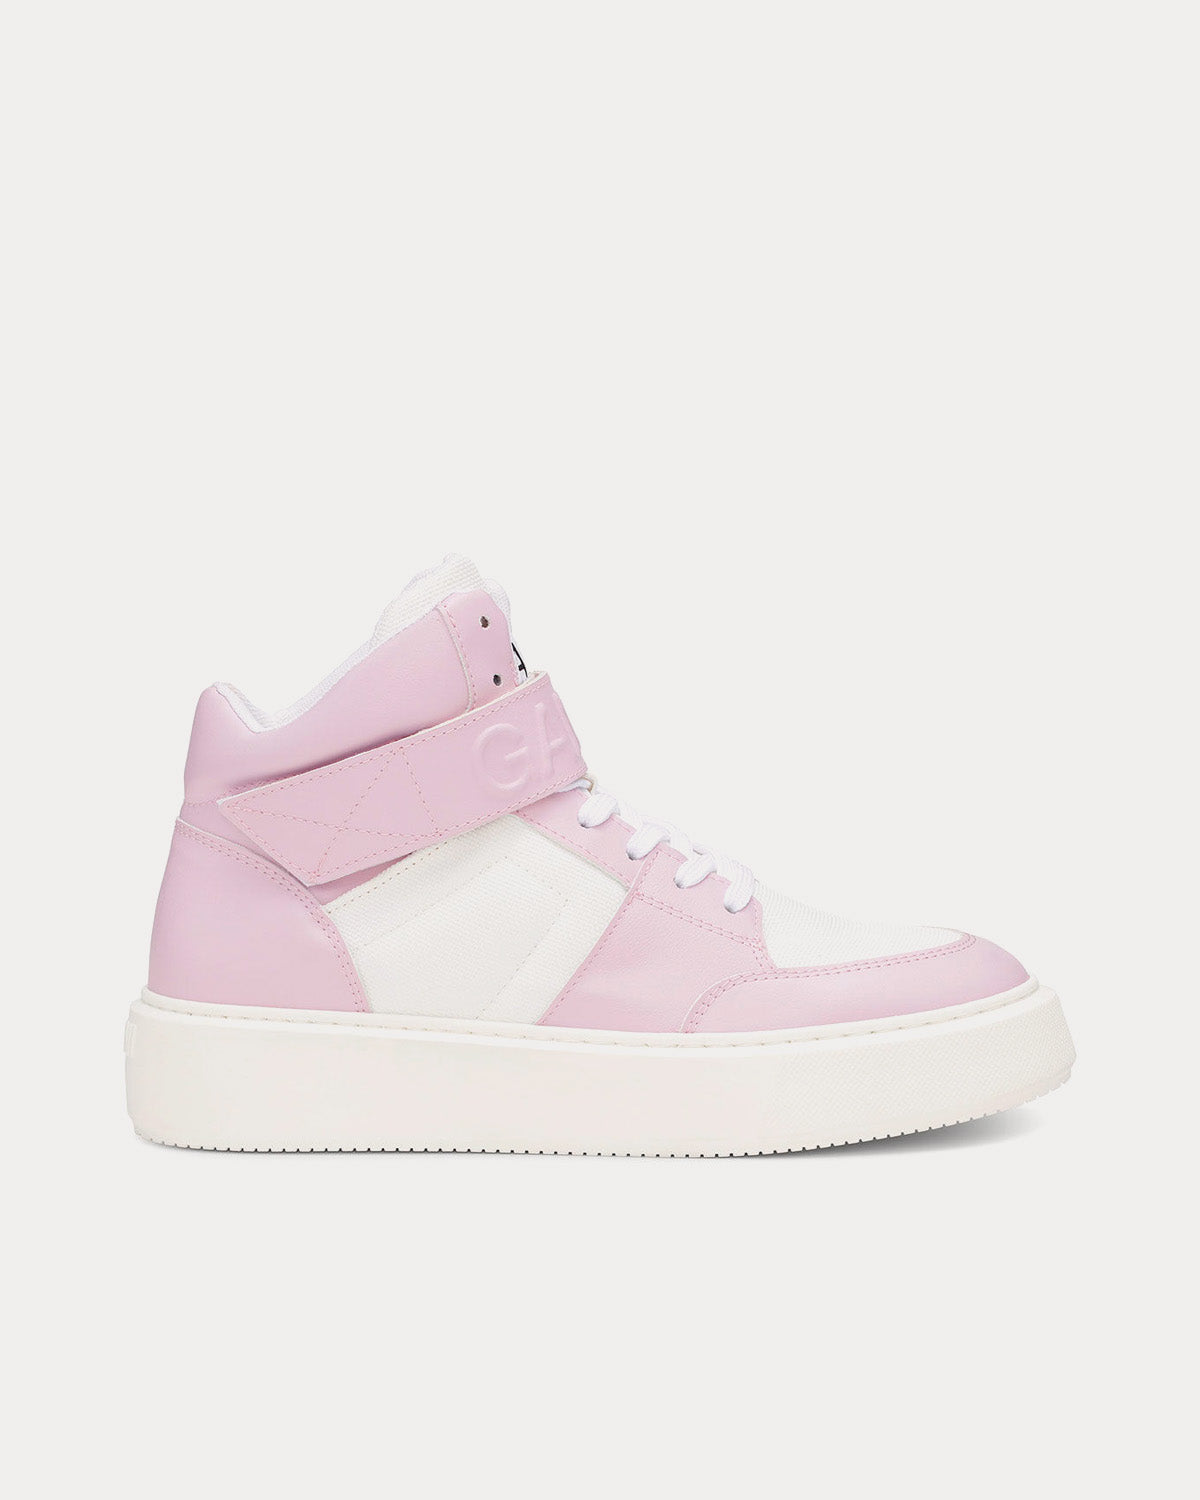 Ganni - Sporty Mix Light Lilac High Top Sneakers